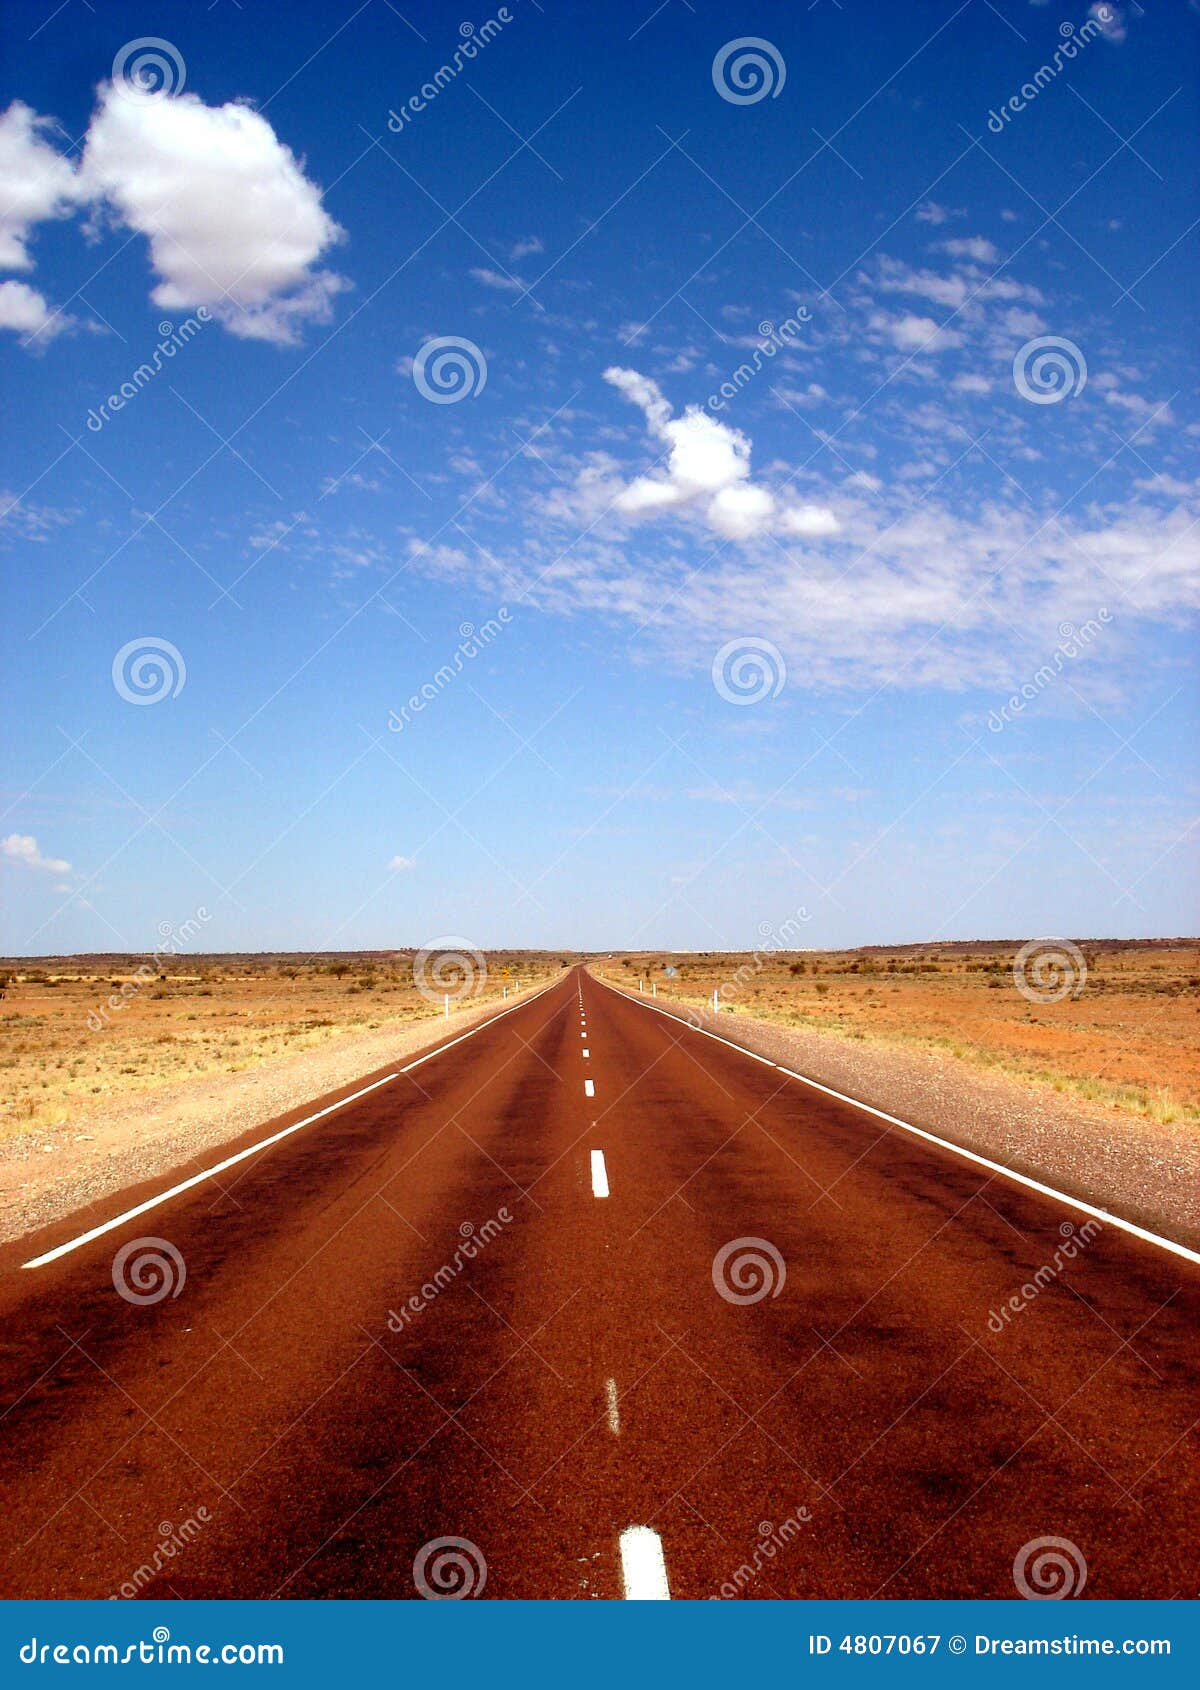 Endless road stock image. Image of scenery, territory - 4807067